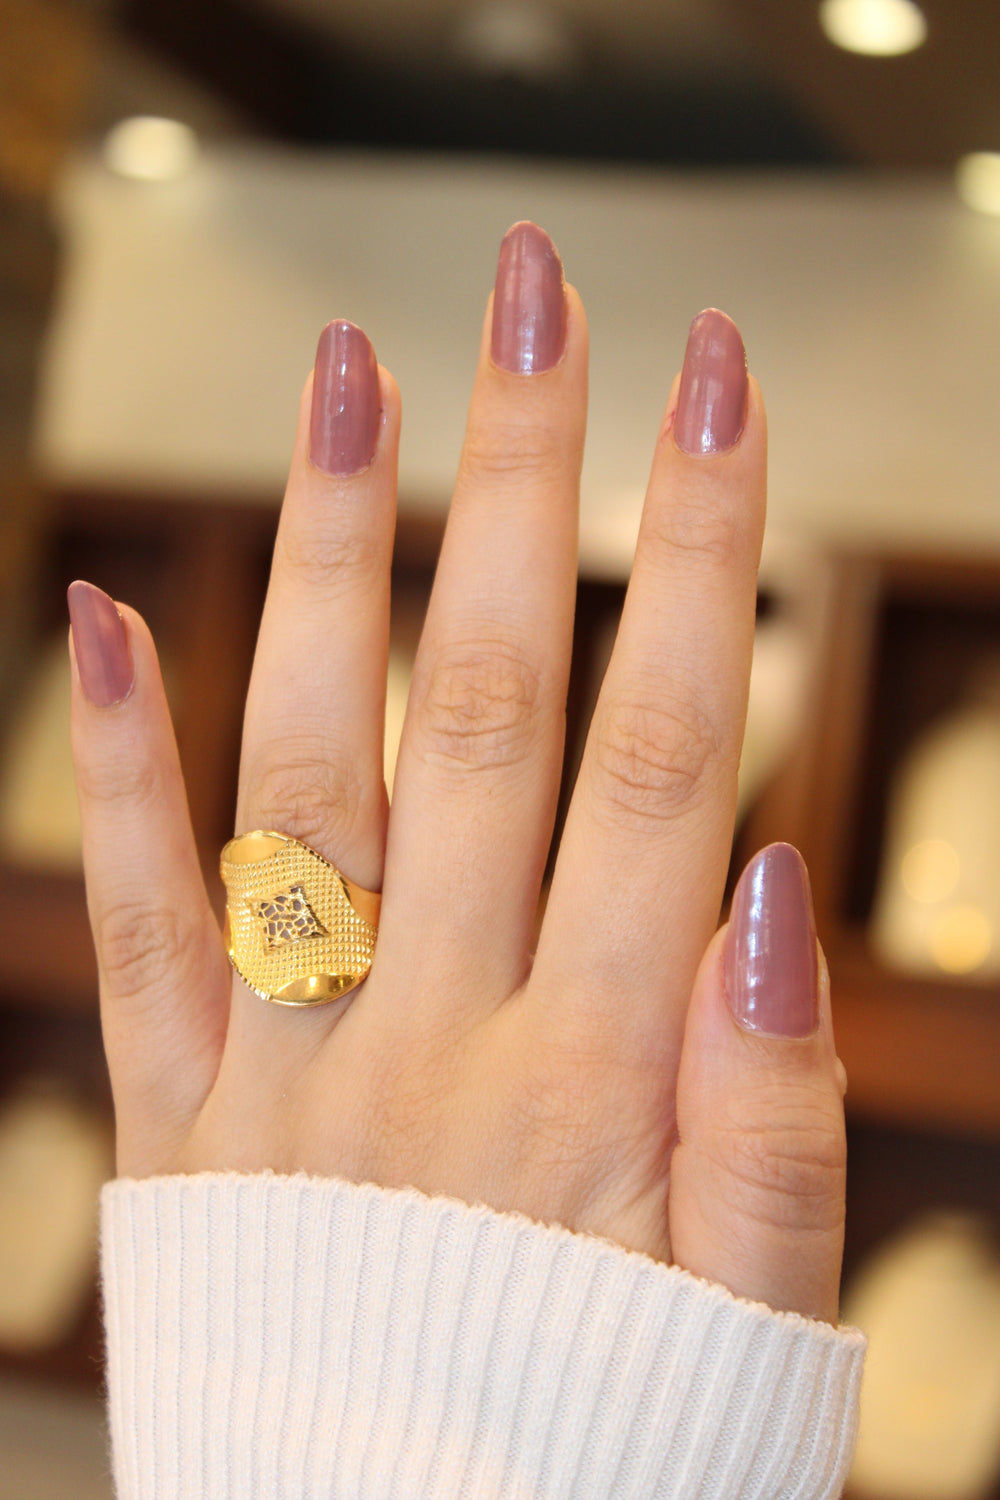 21K Fancy Ring Made of 21K Yellow Gold by Saeed Jewelry-20799